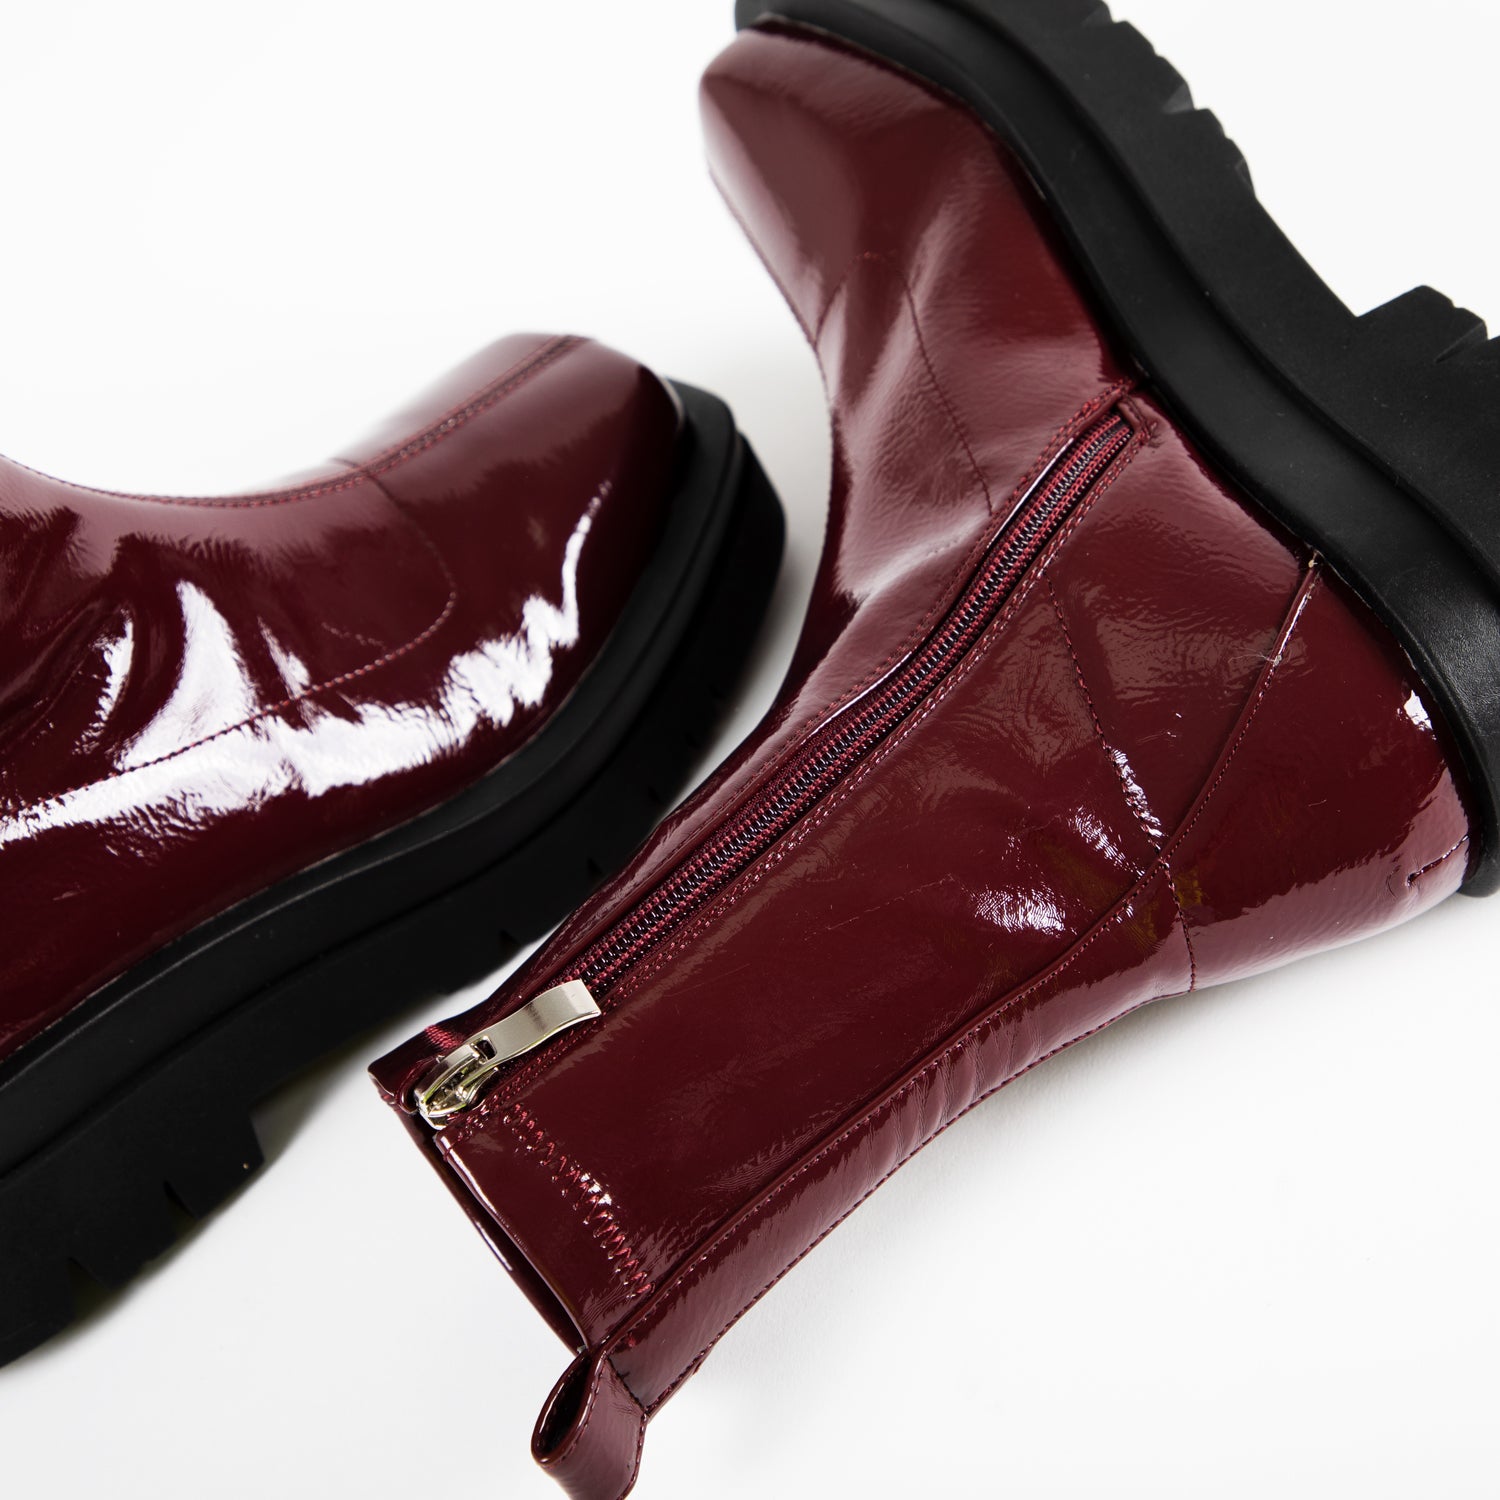 Raid Milla Ankle Boot in Dark Red